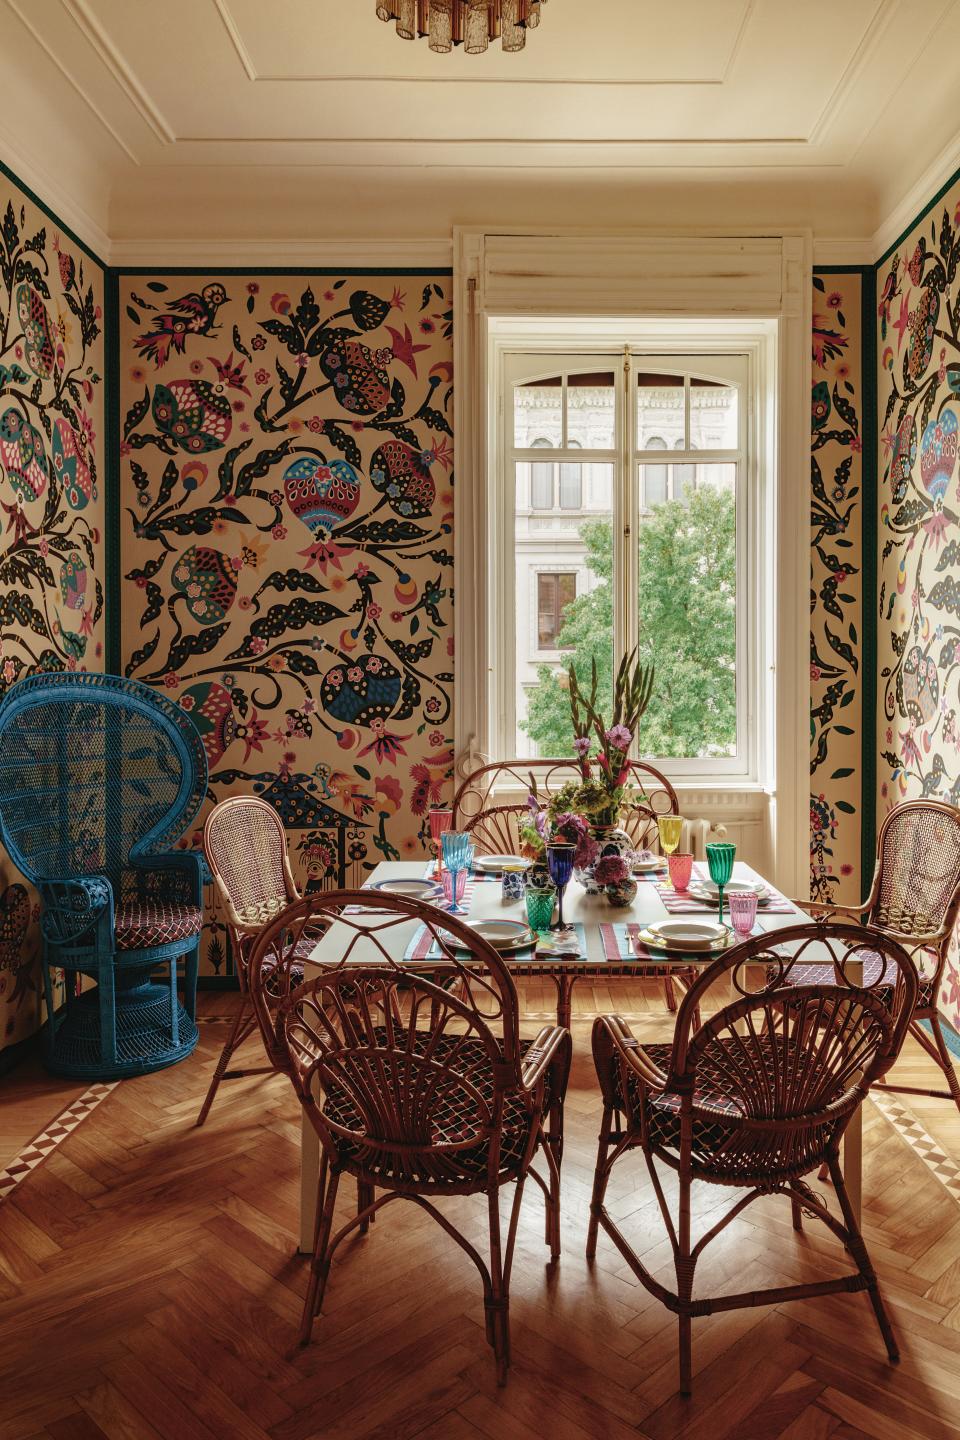 In the dining room, vintage bamboo chairs with cushions of a La DoubleJ fabric surround a white Molteni table set with pieces from La DoubleJ. Custom Tree of Life wallpaper created from an illustration by artist Kirsten Synge based on collages Martin found in Bali.